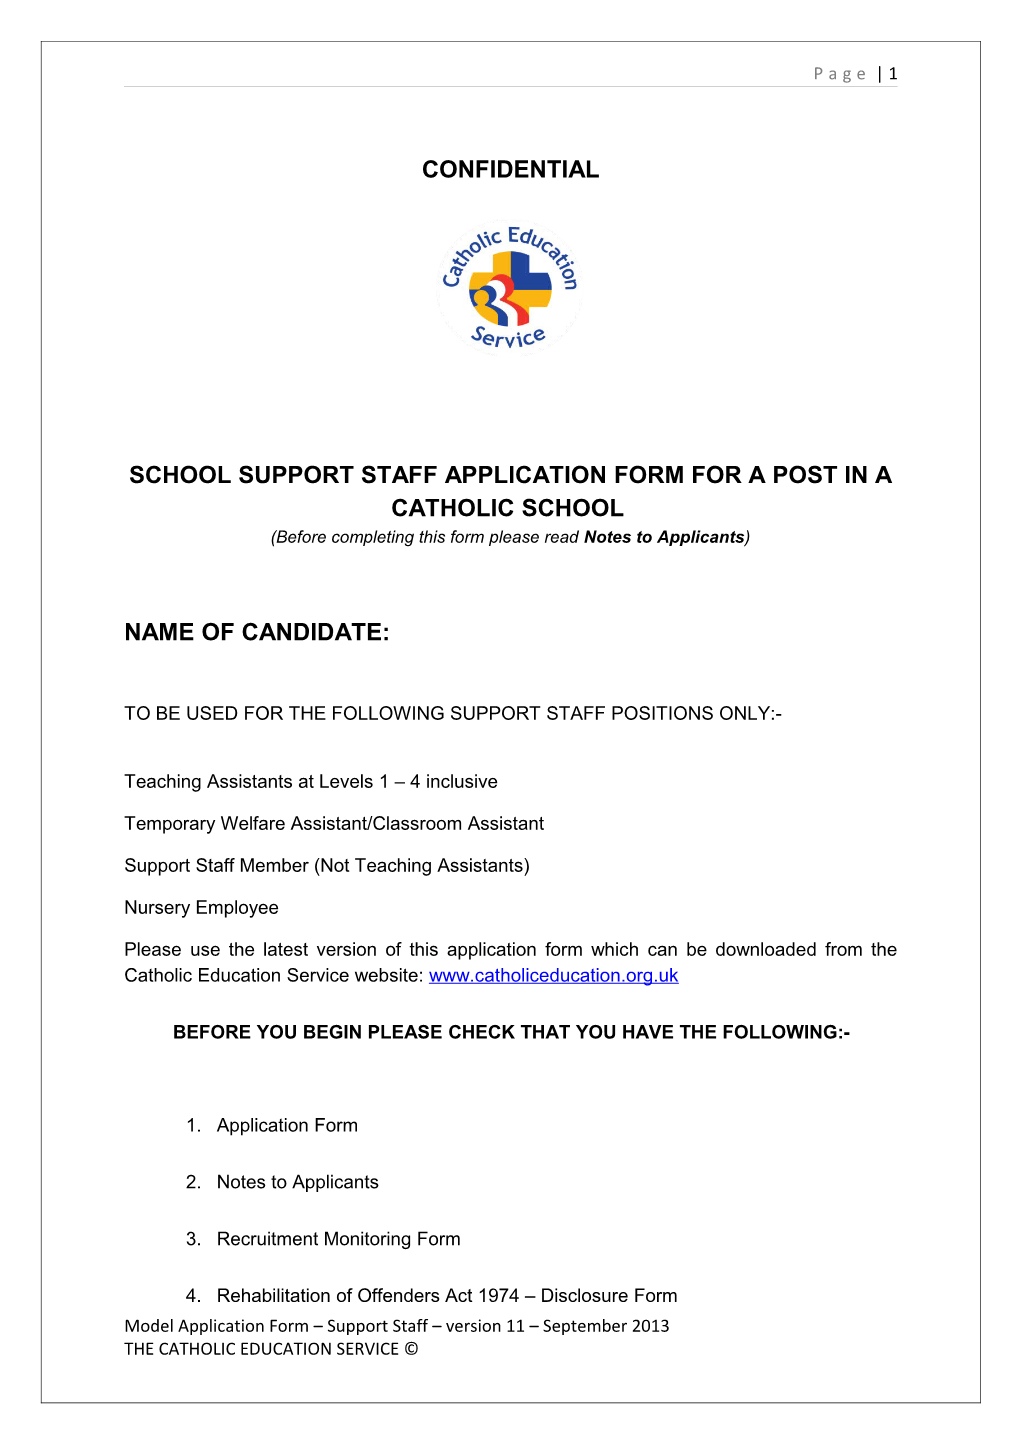 School Support Staff Application Form for a Post in a Catholic School s2